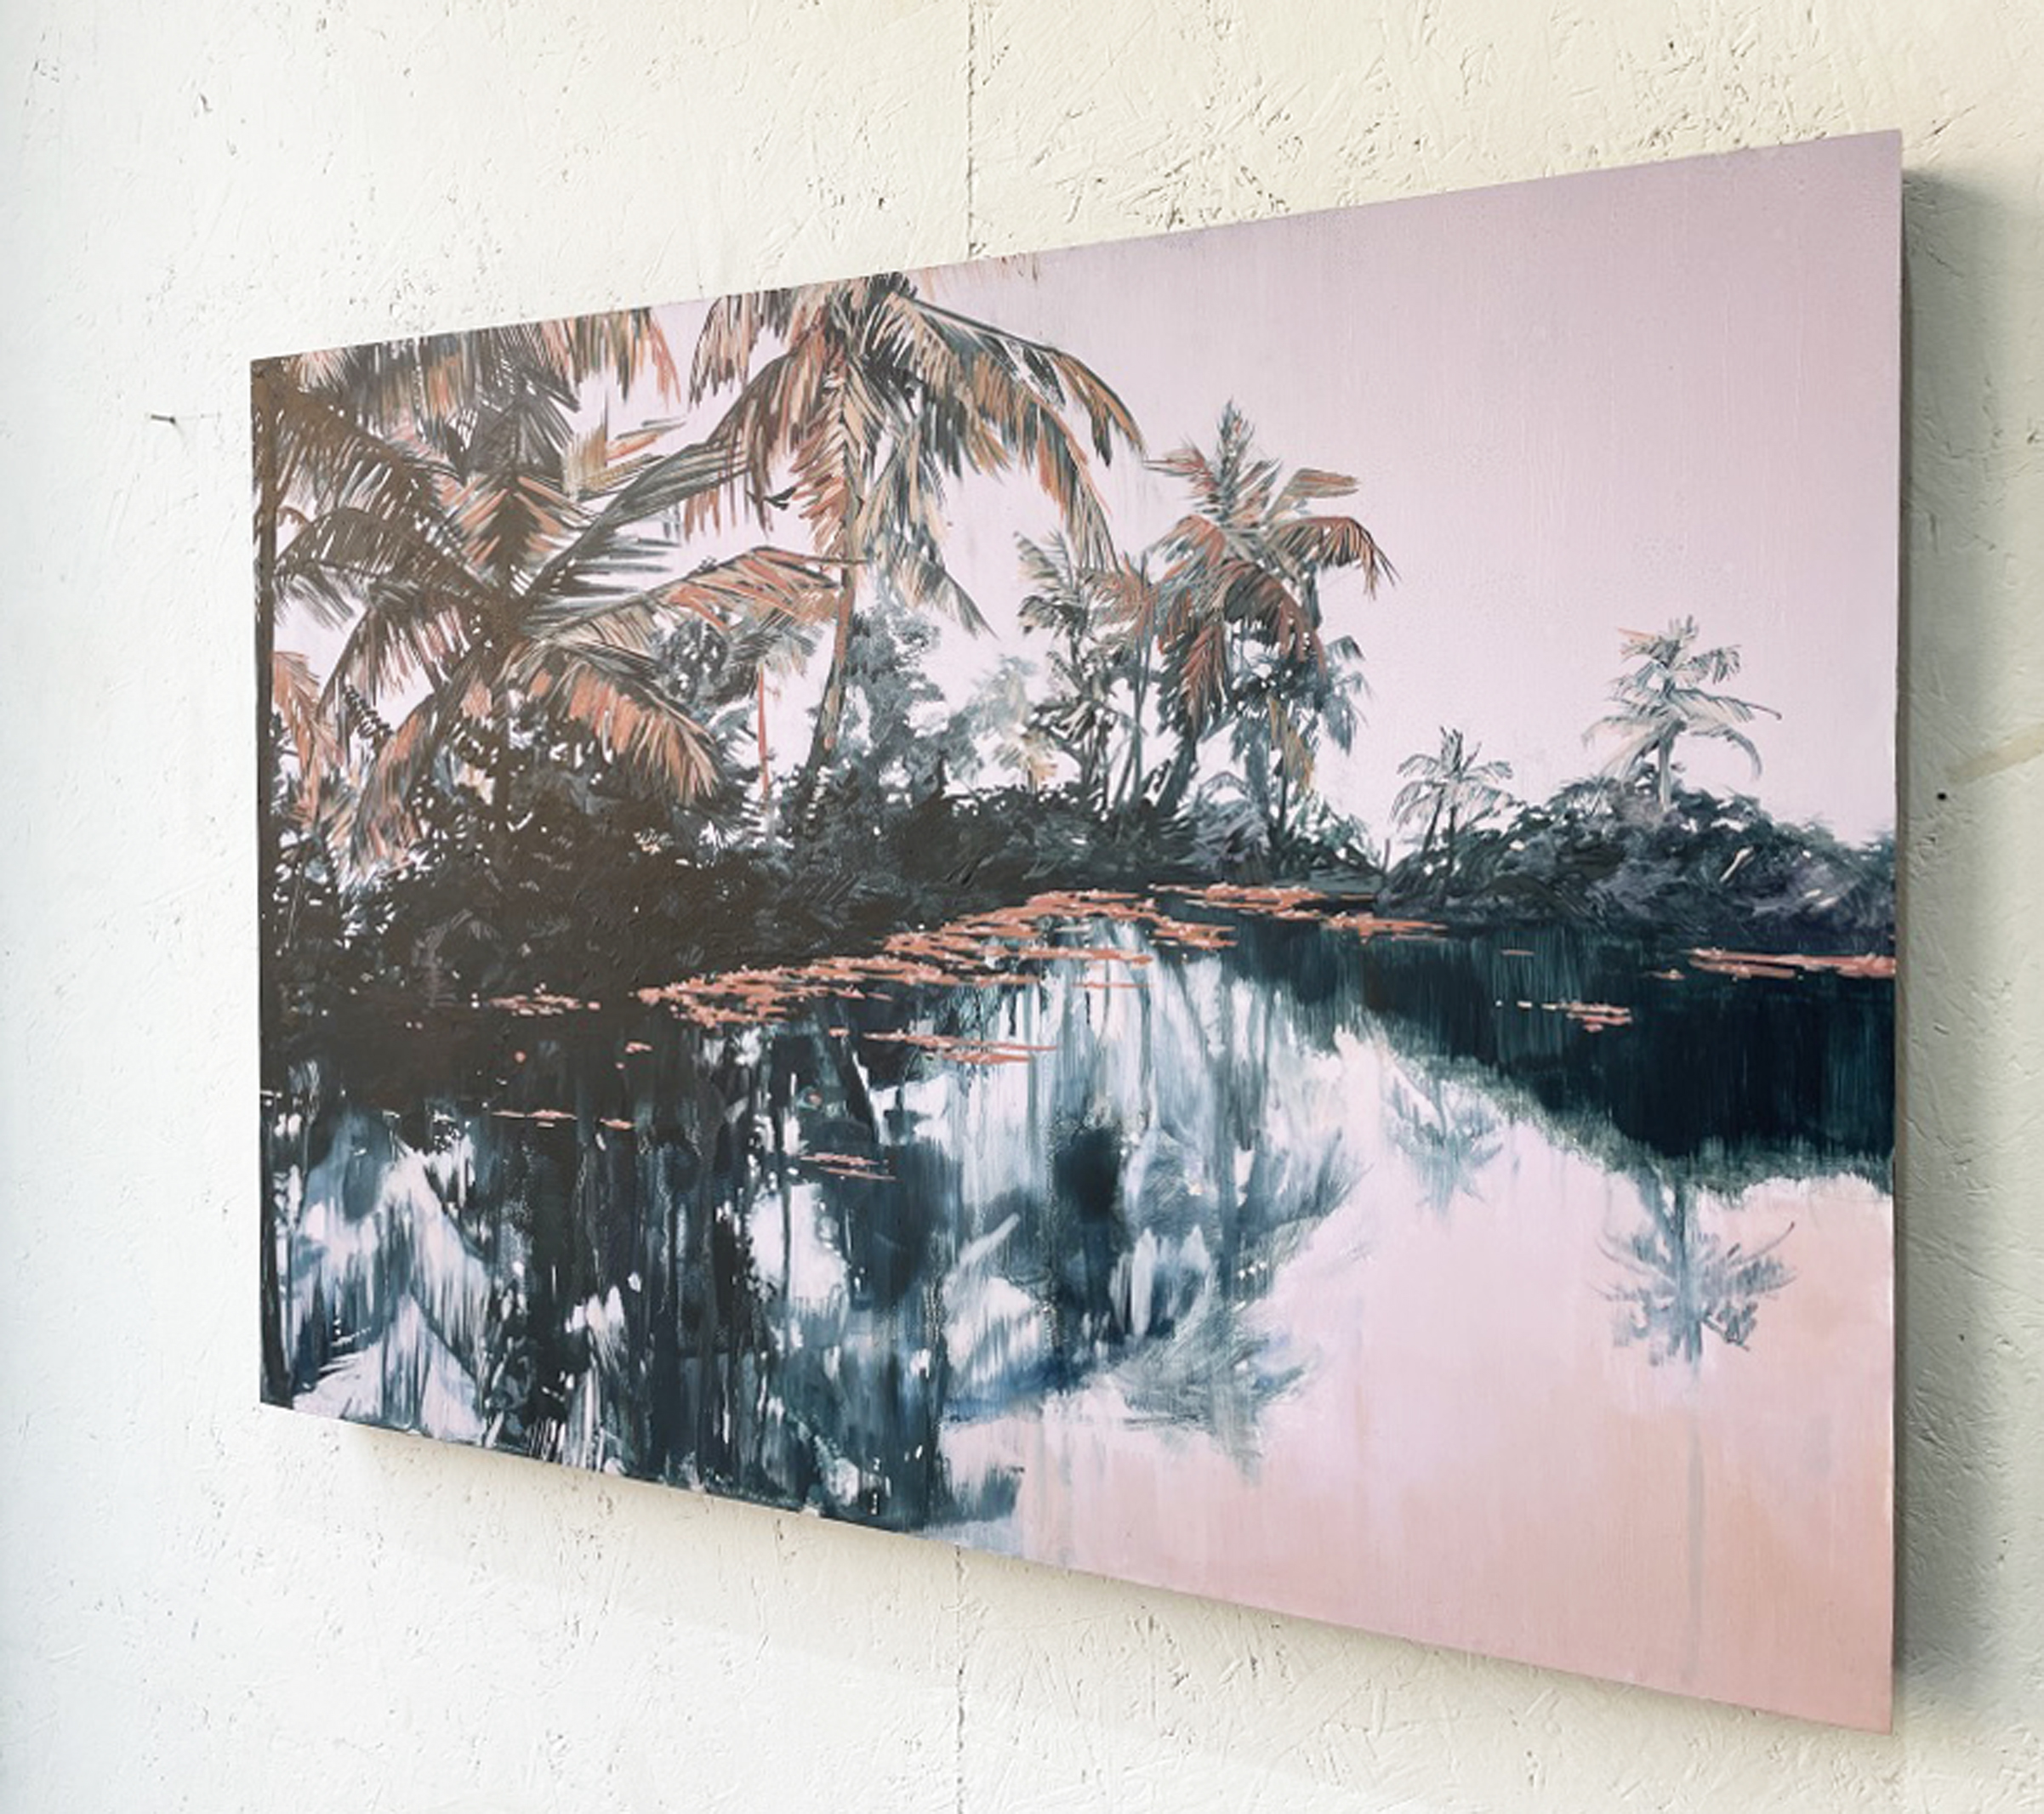 Kochi Lagoon by Claire Cansick in situ